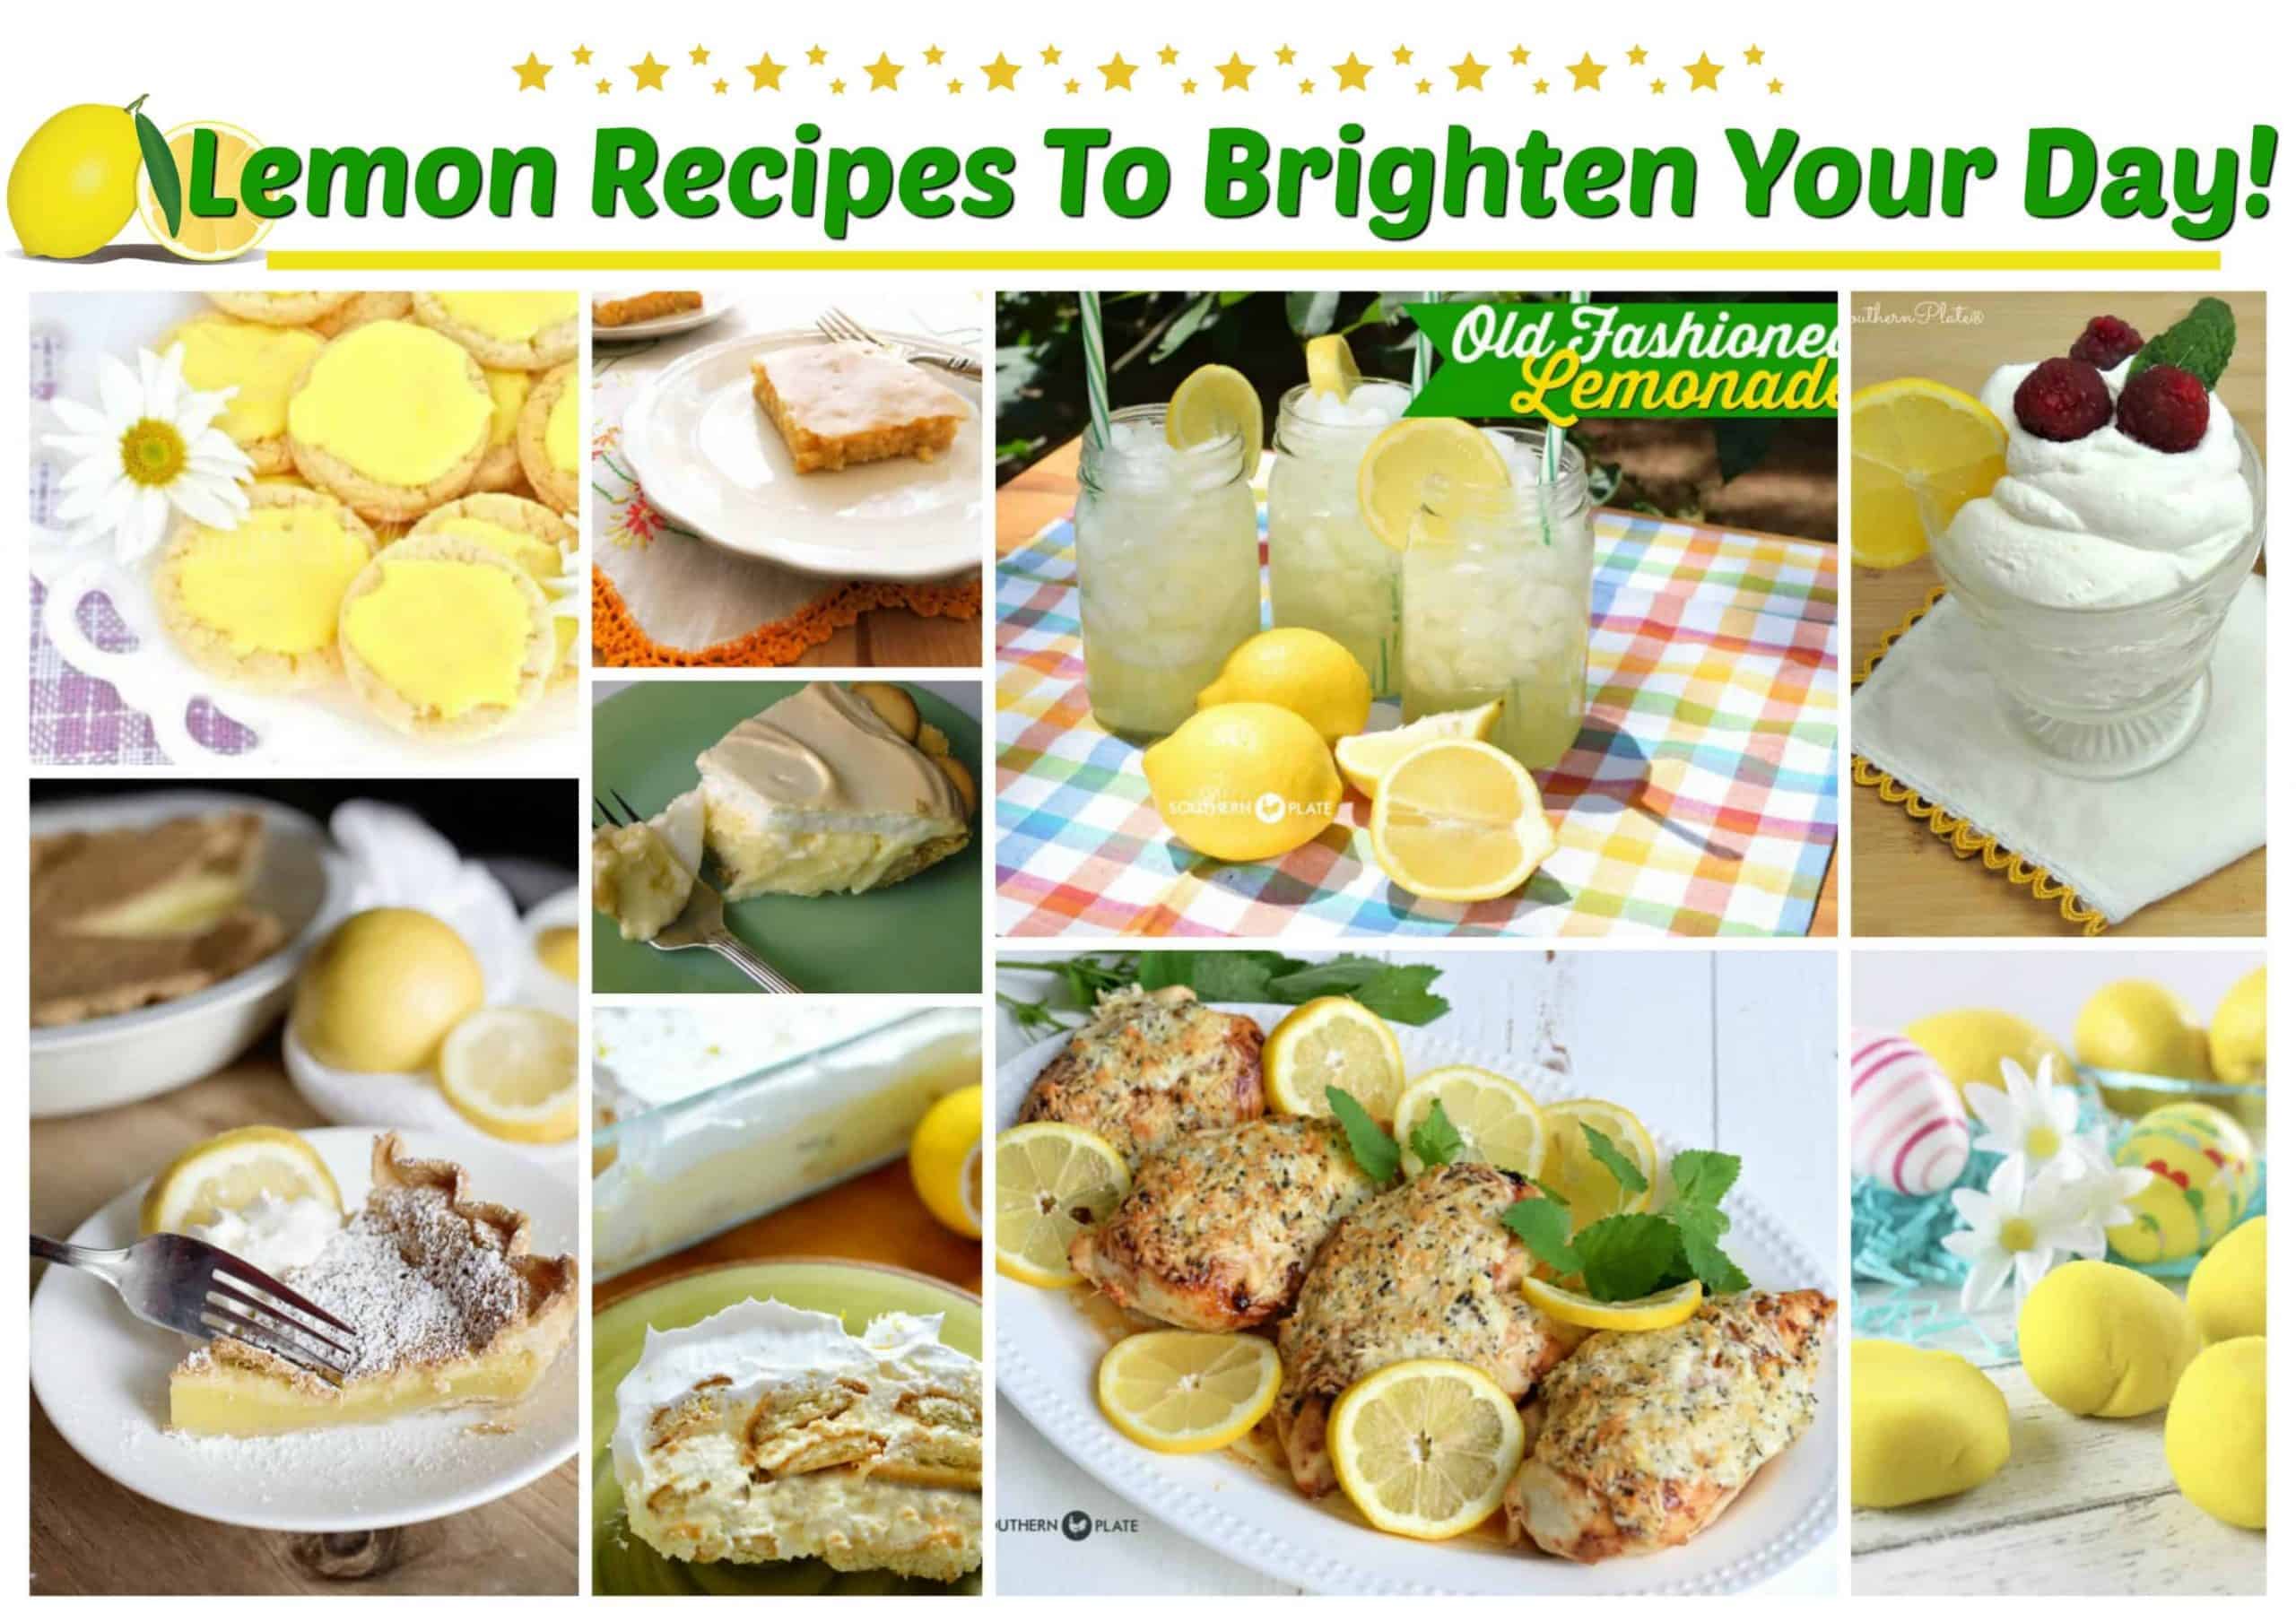 10 Lemon Recipes To Brighten Your Day!